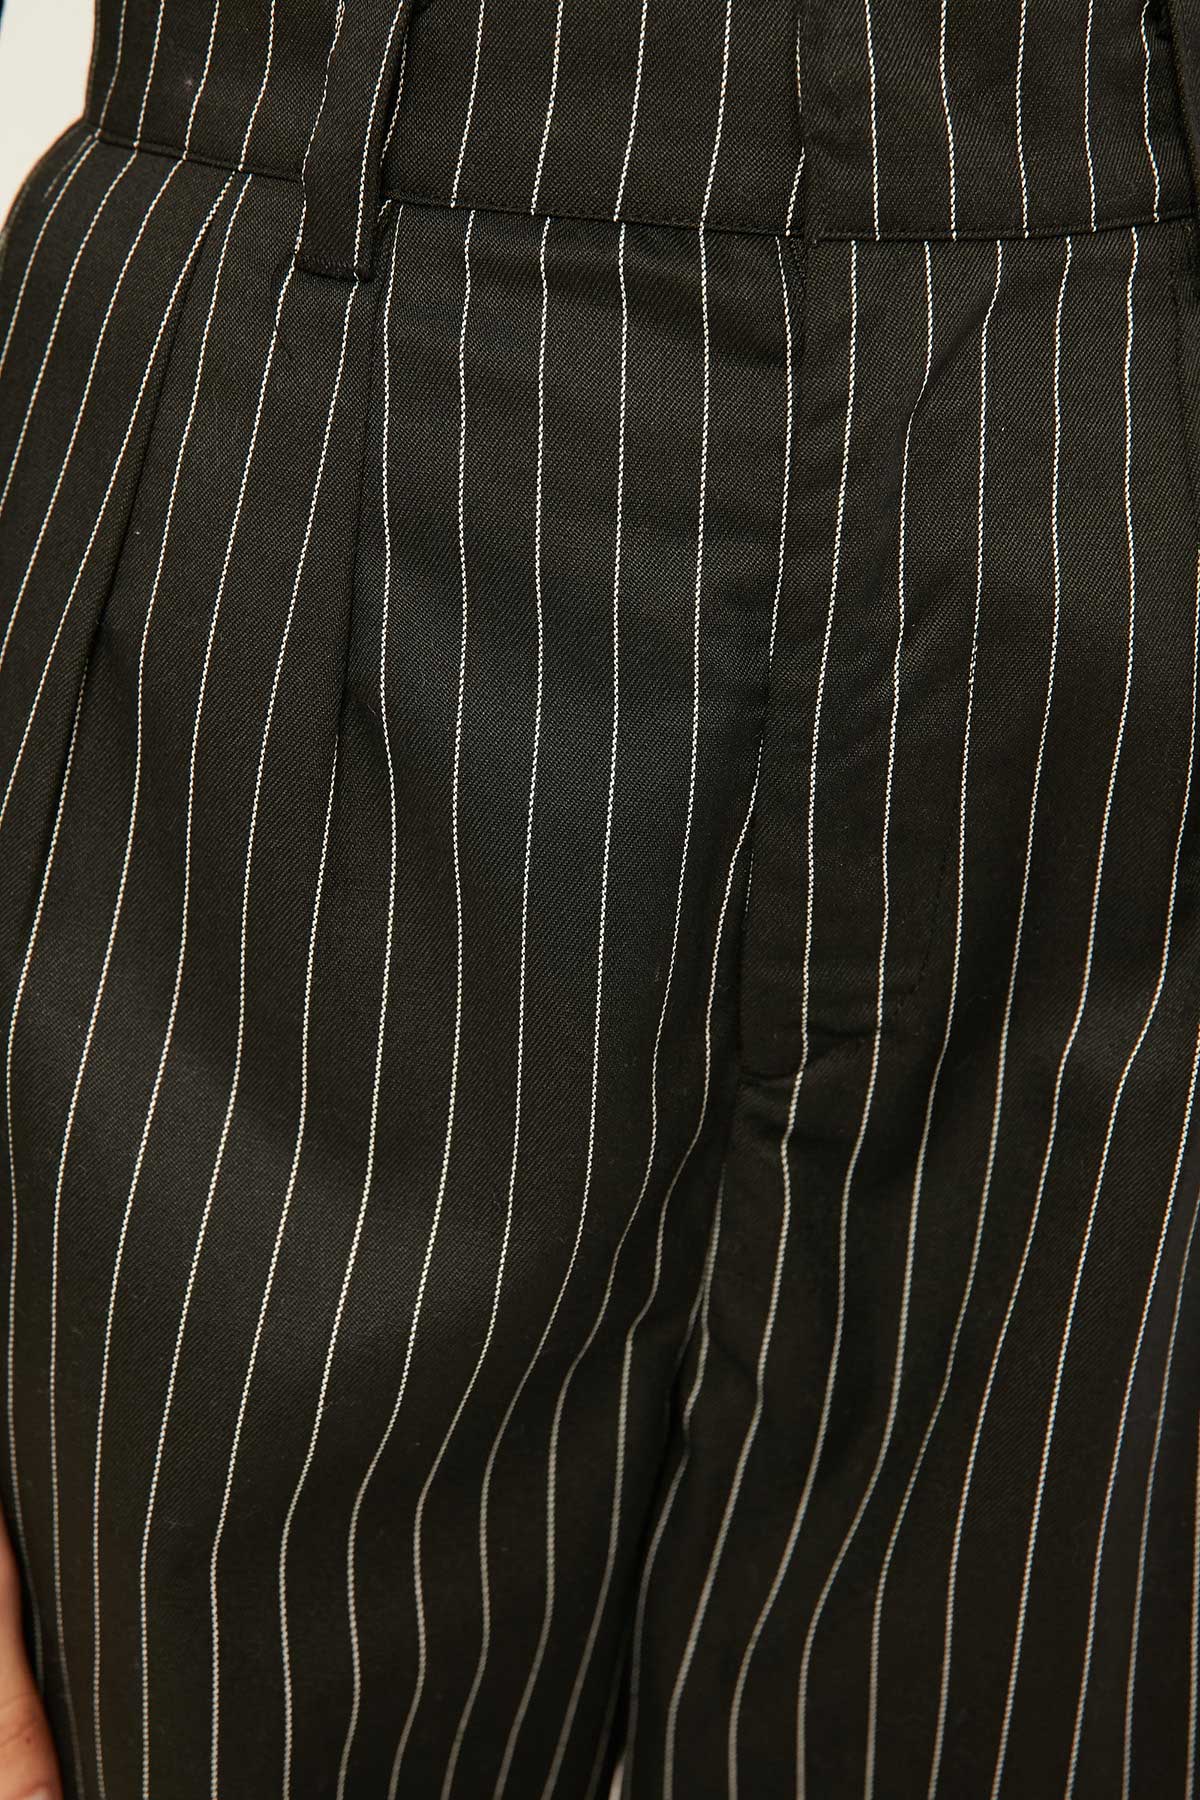 Perfect Stranger Stay With Me Pant Black Pinstripe